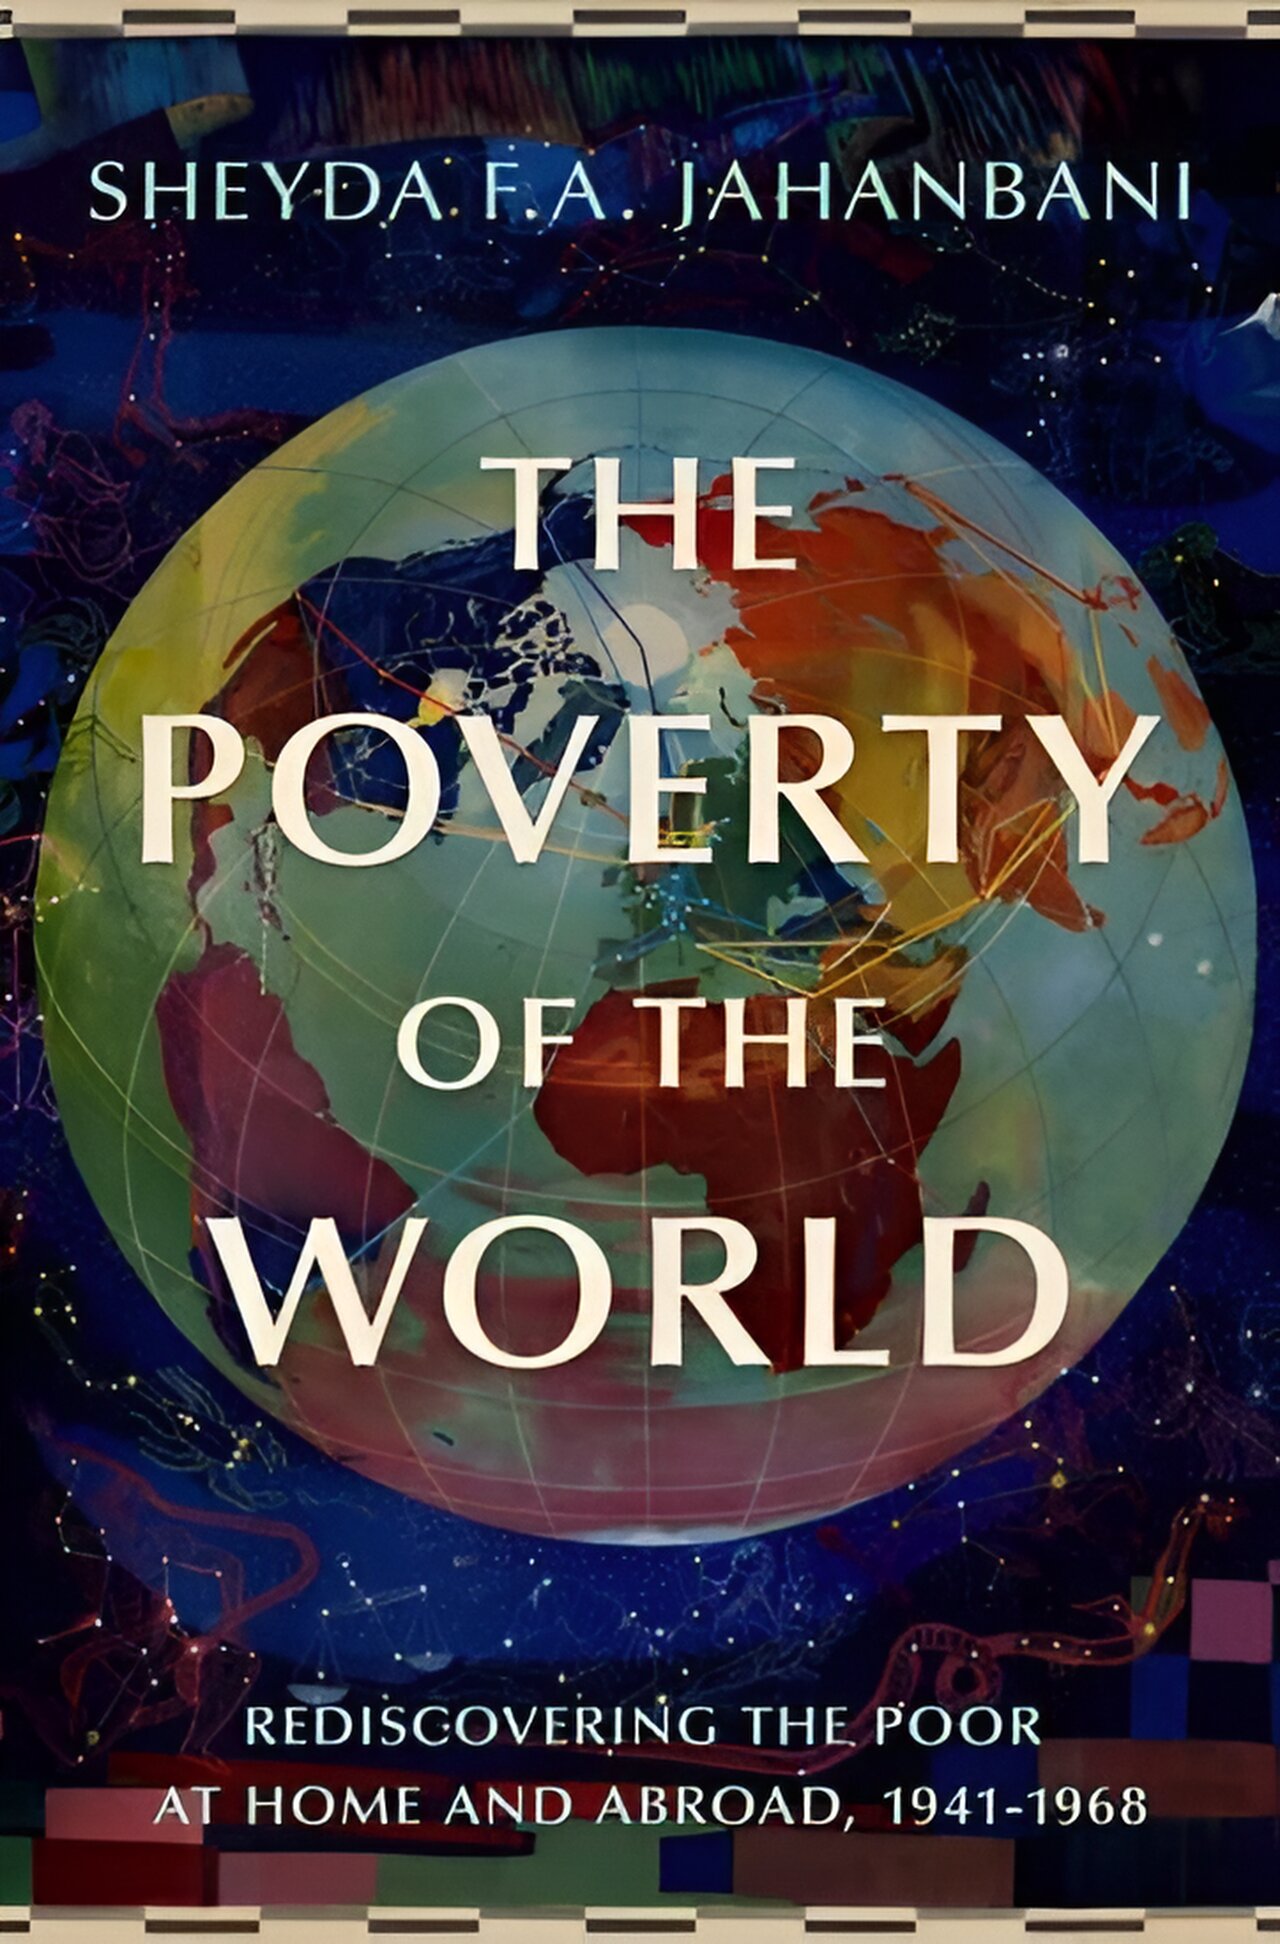 America’s role in combating global poverty examined in new book